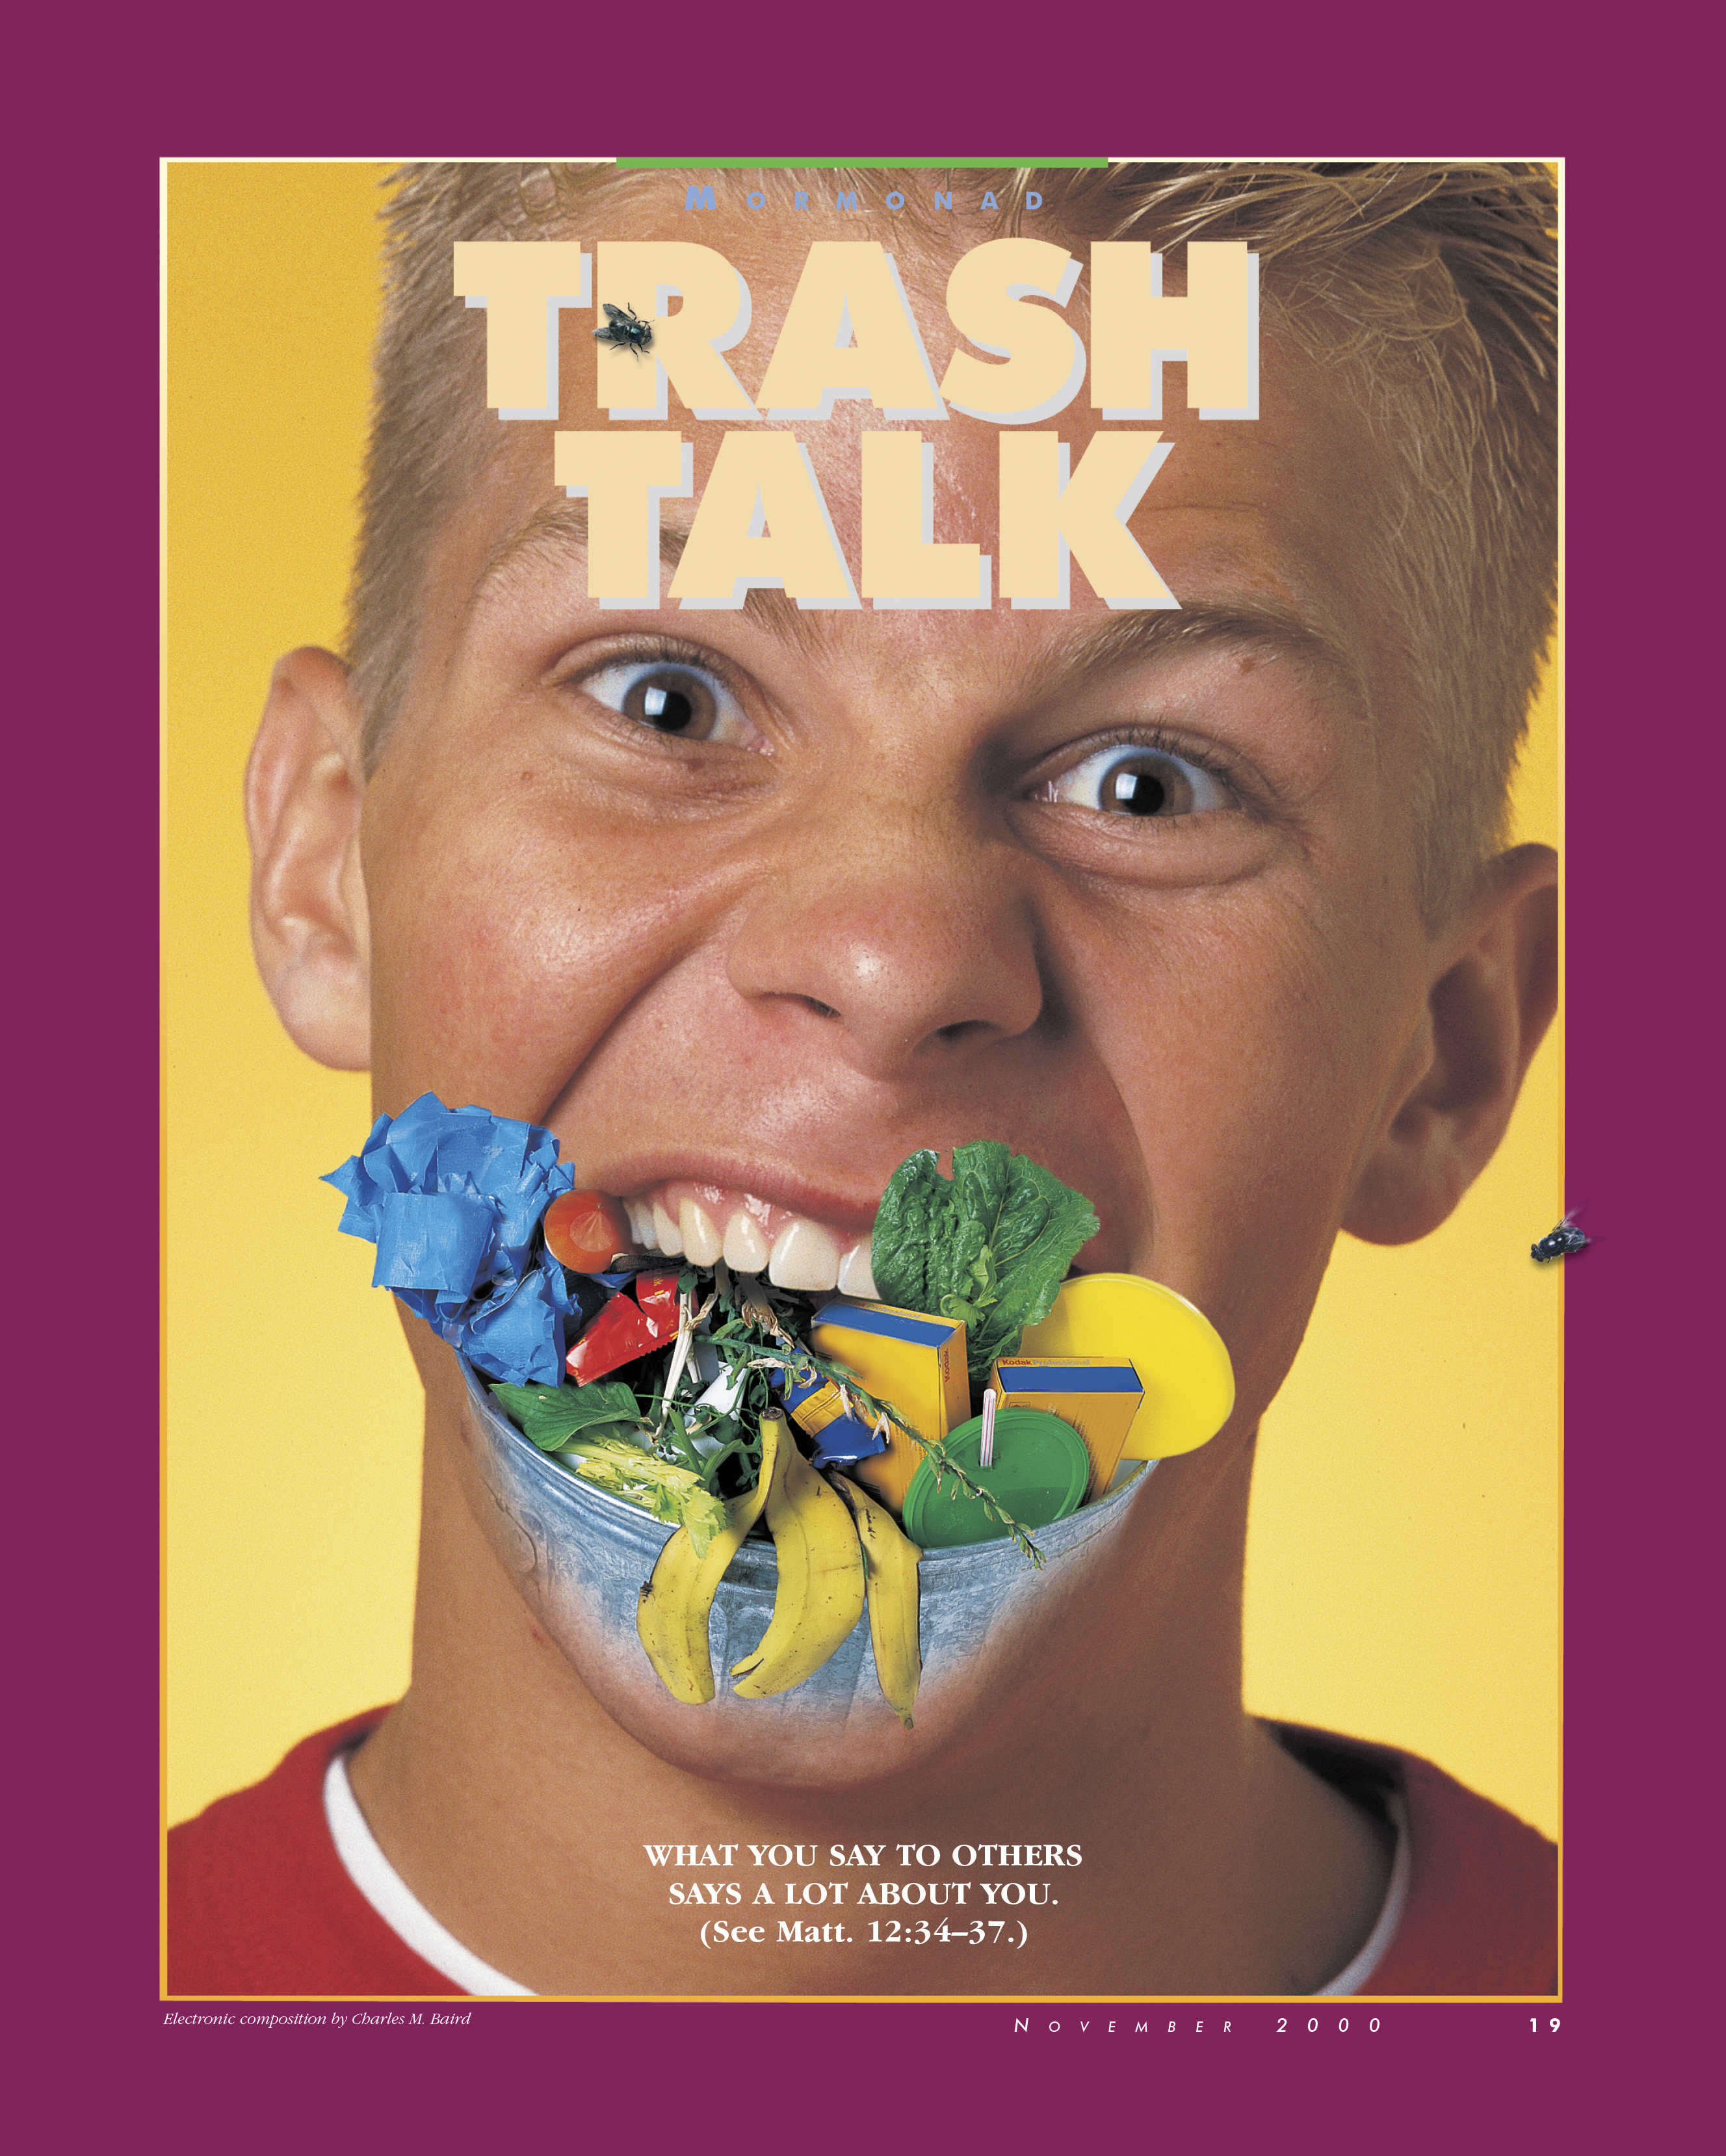 Trash Talk. What you say to others says a lot about you. (See Matt. 12:34–37.) Nov. 2000 © undefined ipCode 1.